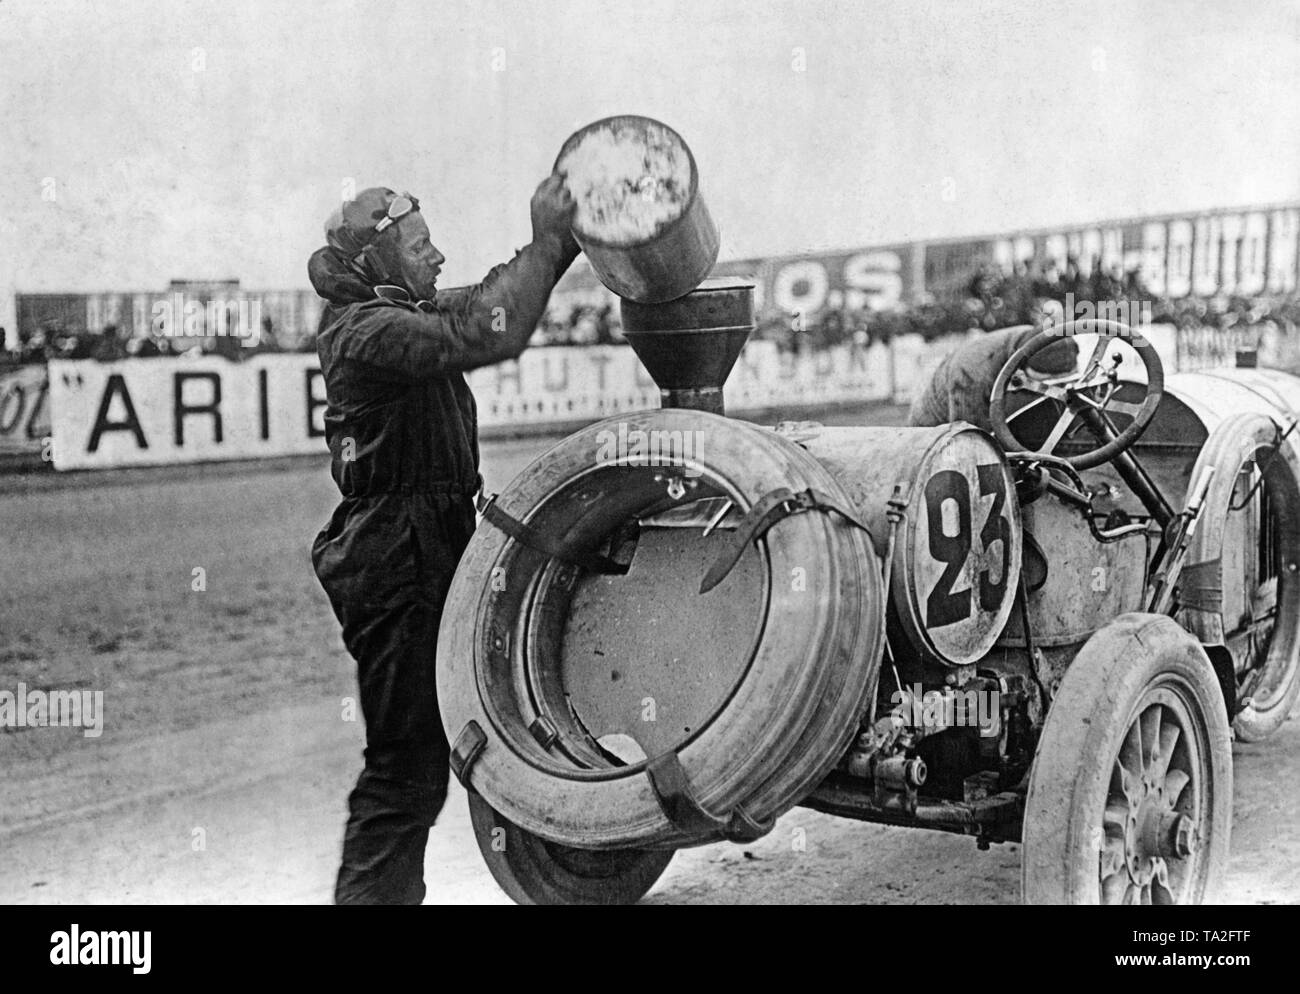 The Benz 150 hp with the number 23 of the French racing driver Rene Hanriot is refueled during the French Grand Prix 1908 in Dieppe. Stock Photo